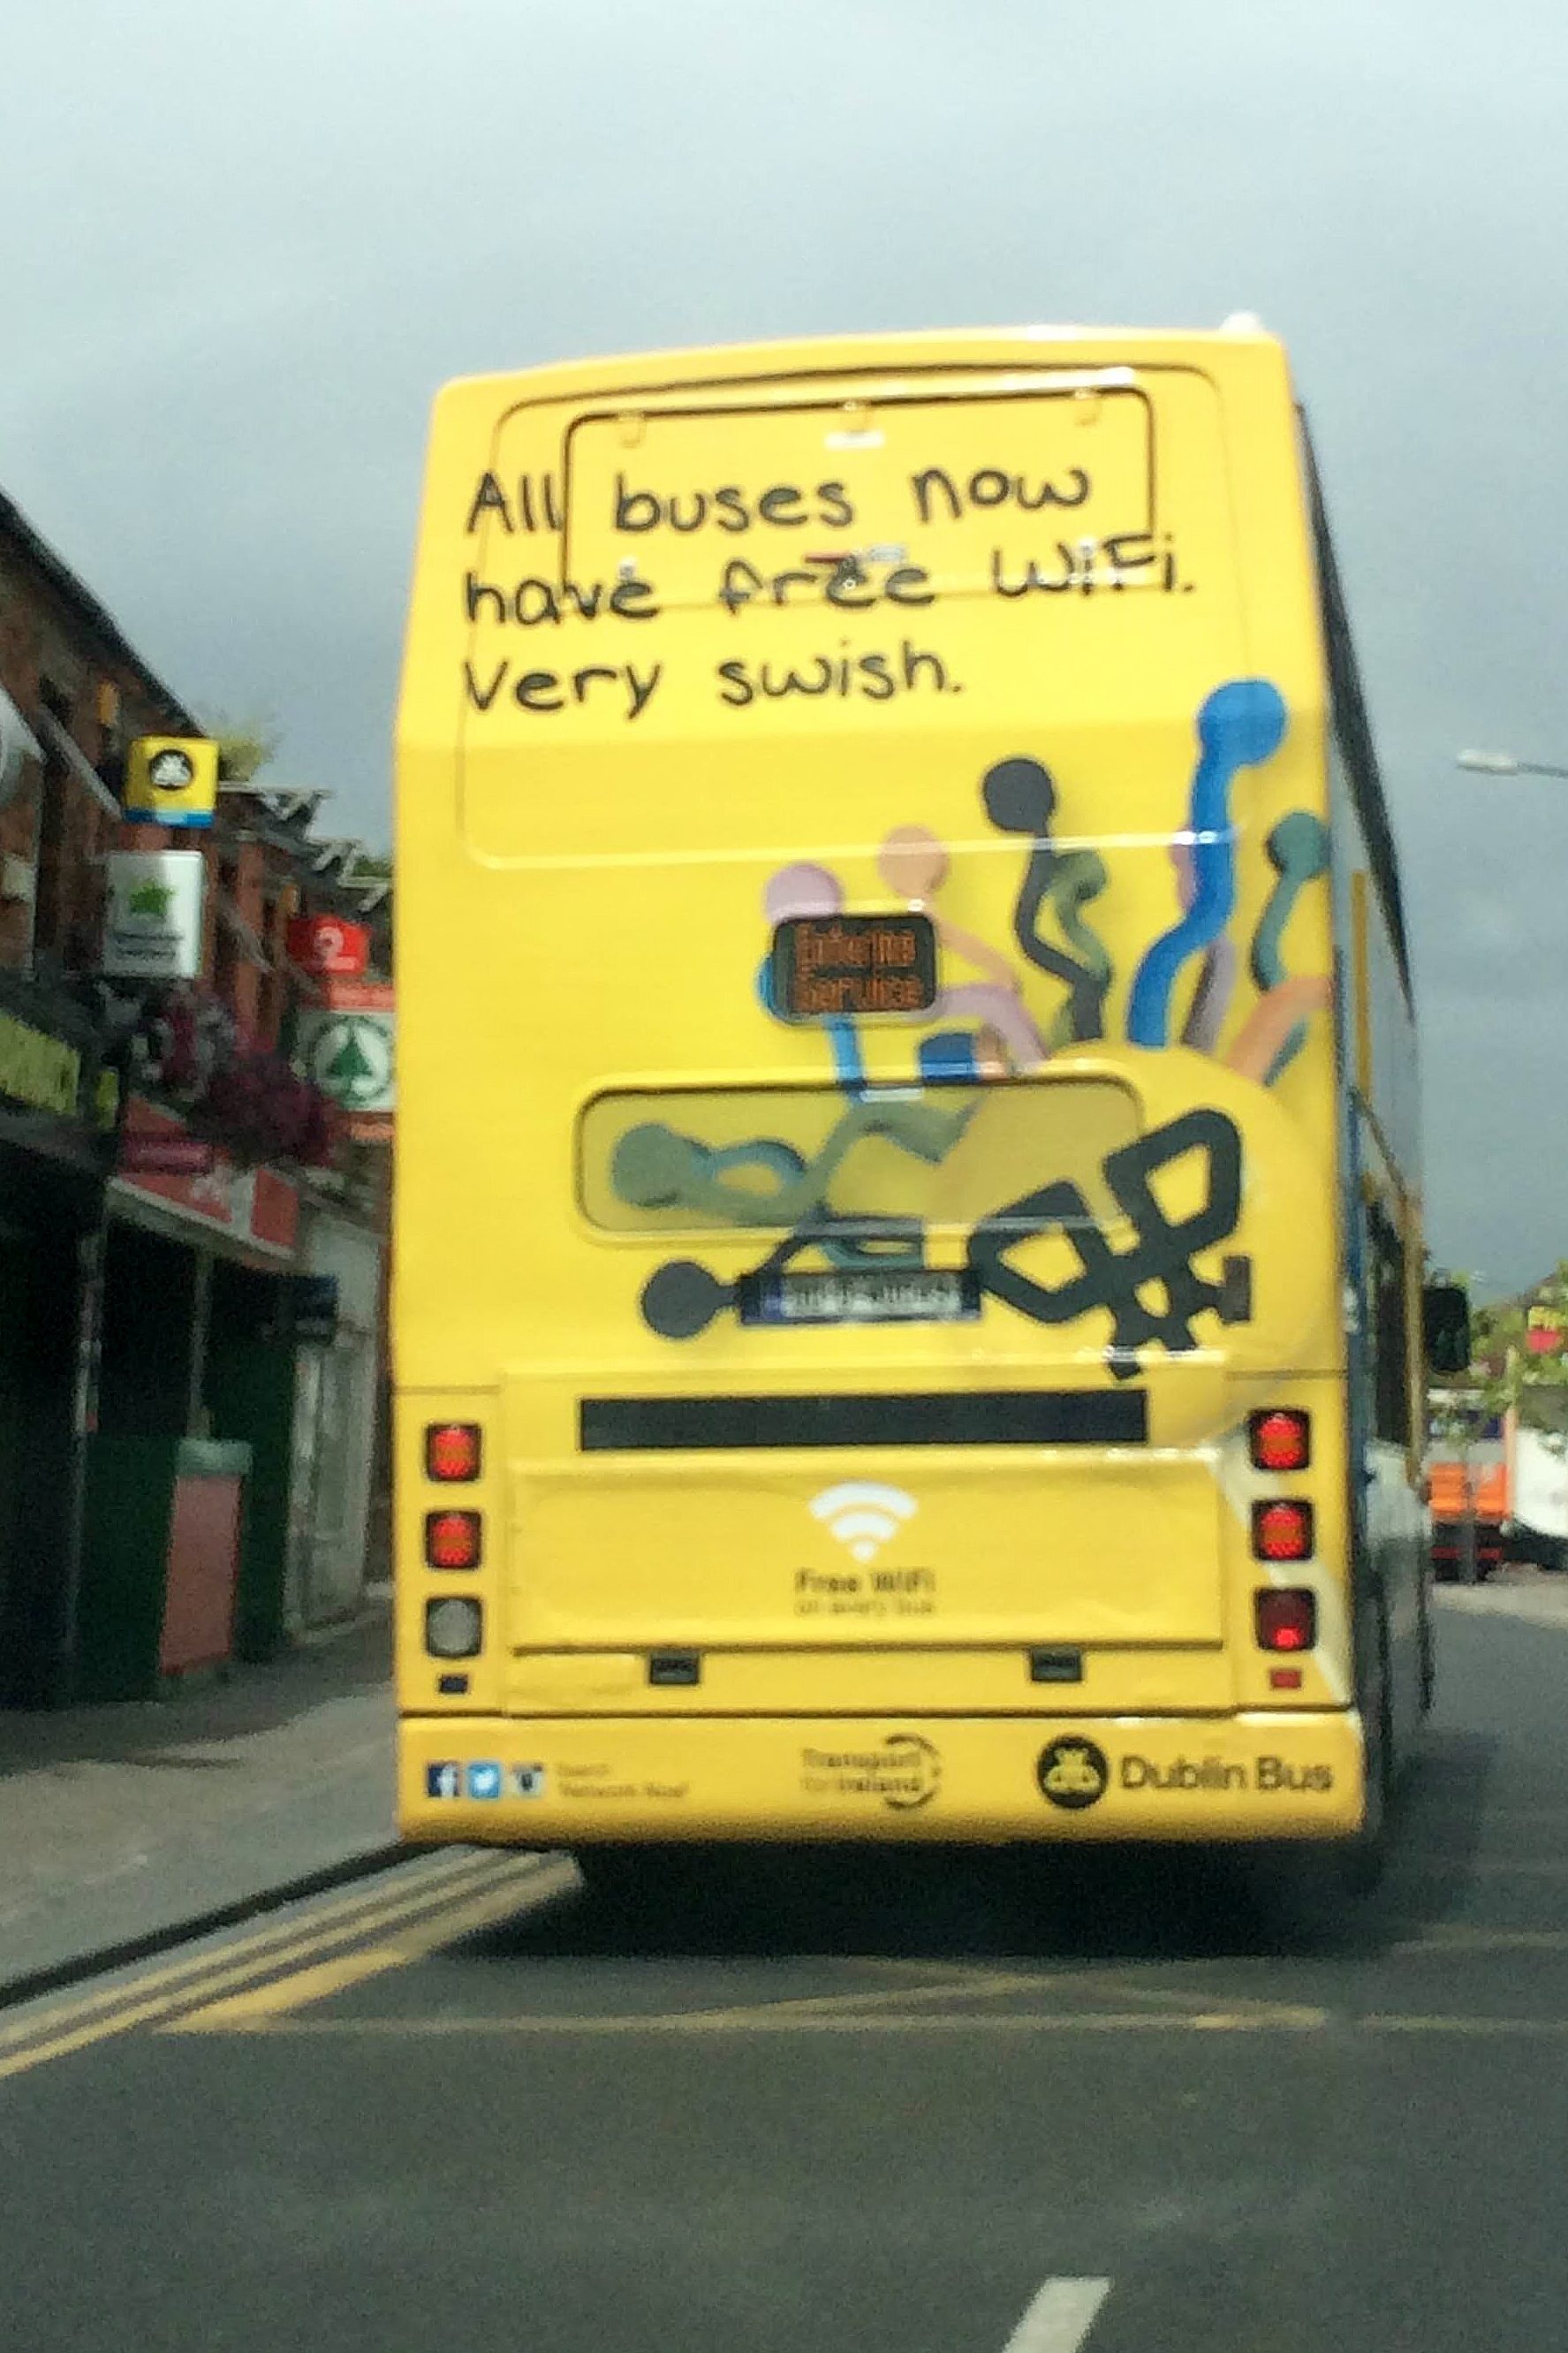 Wi-Fi on Dublin Buses "Too Successful" to Charge Passengers For